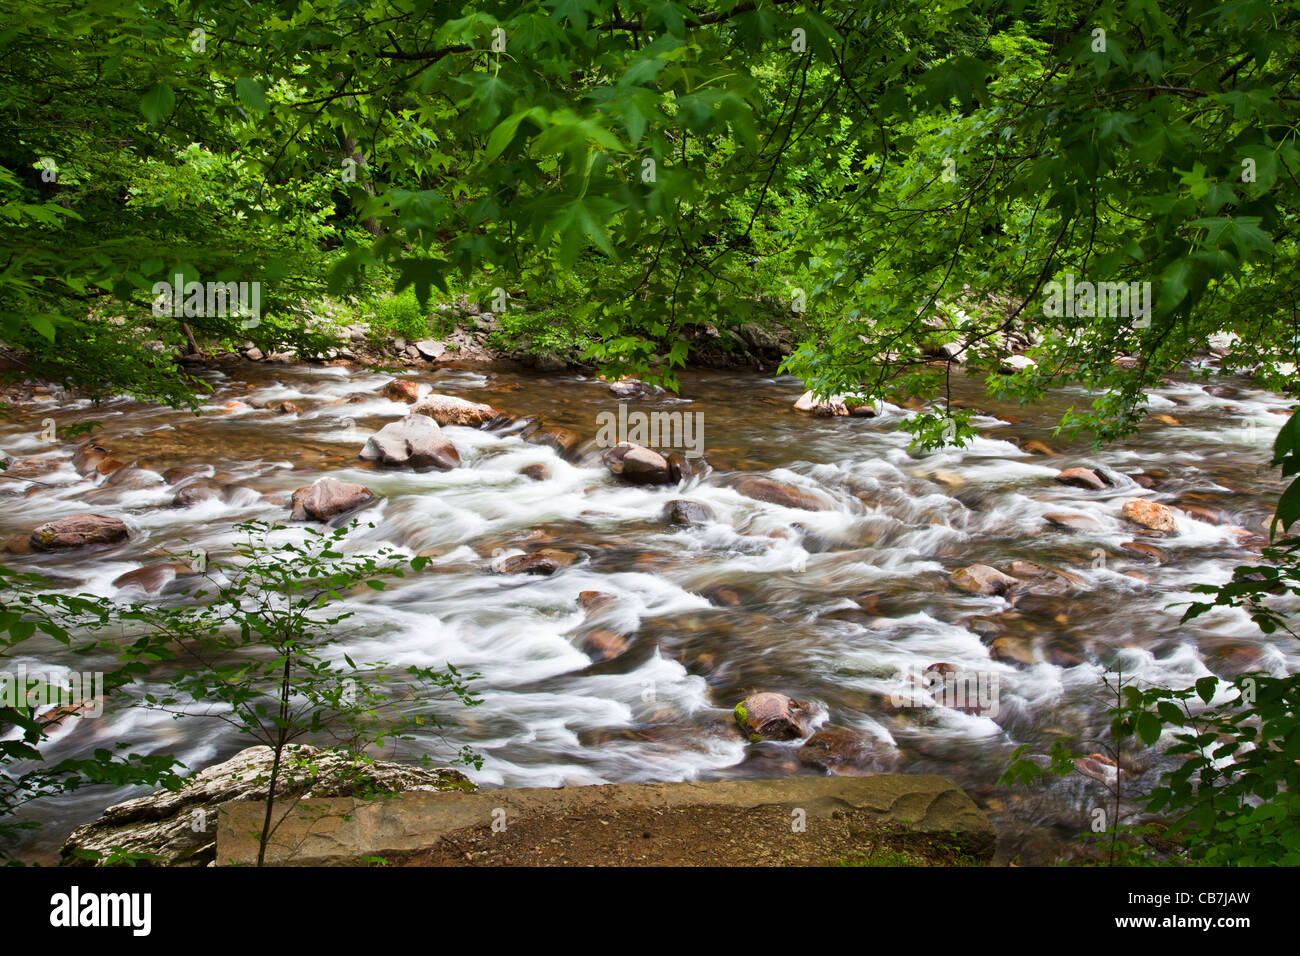 Fast flowing current on the Little River (near Townsend) in the Great Smoky Mountains National Park in Tennessee. Stock Photo